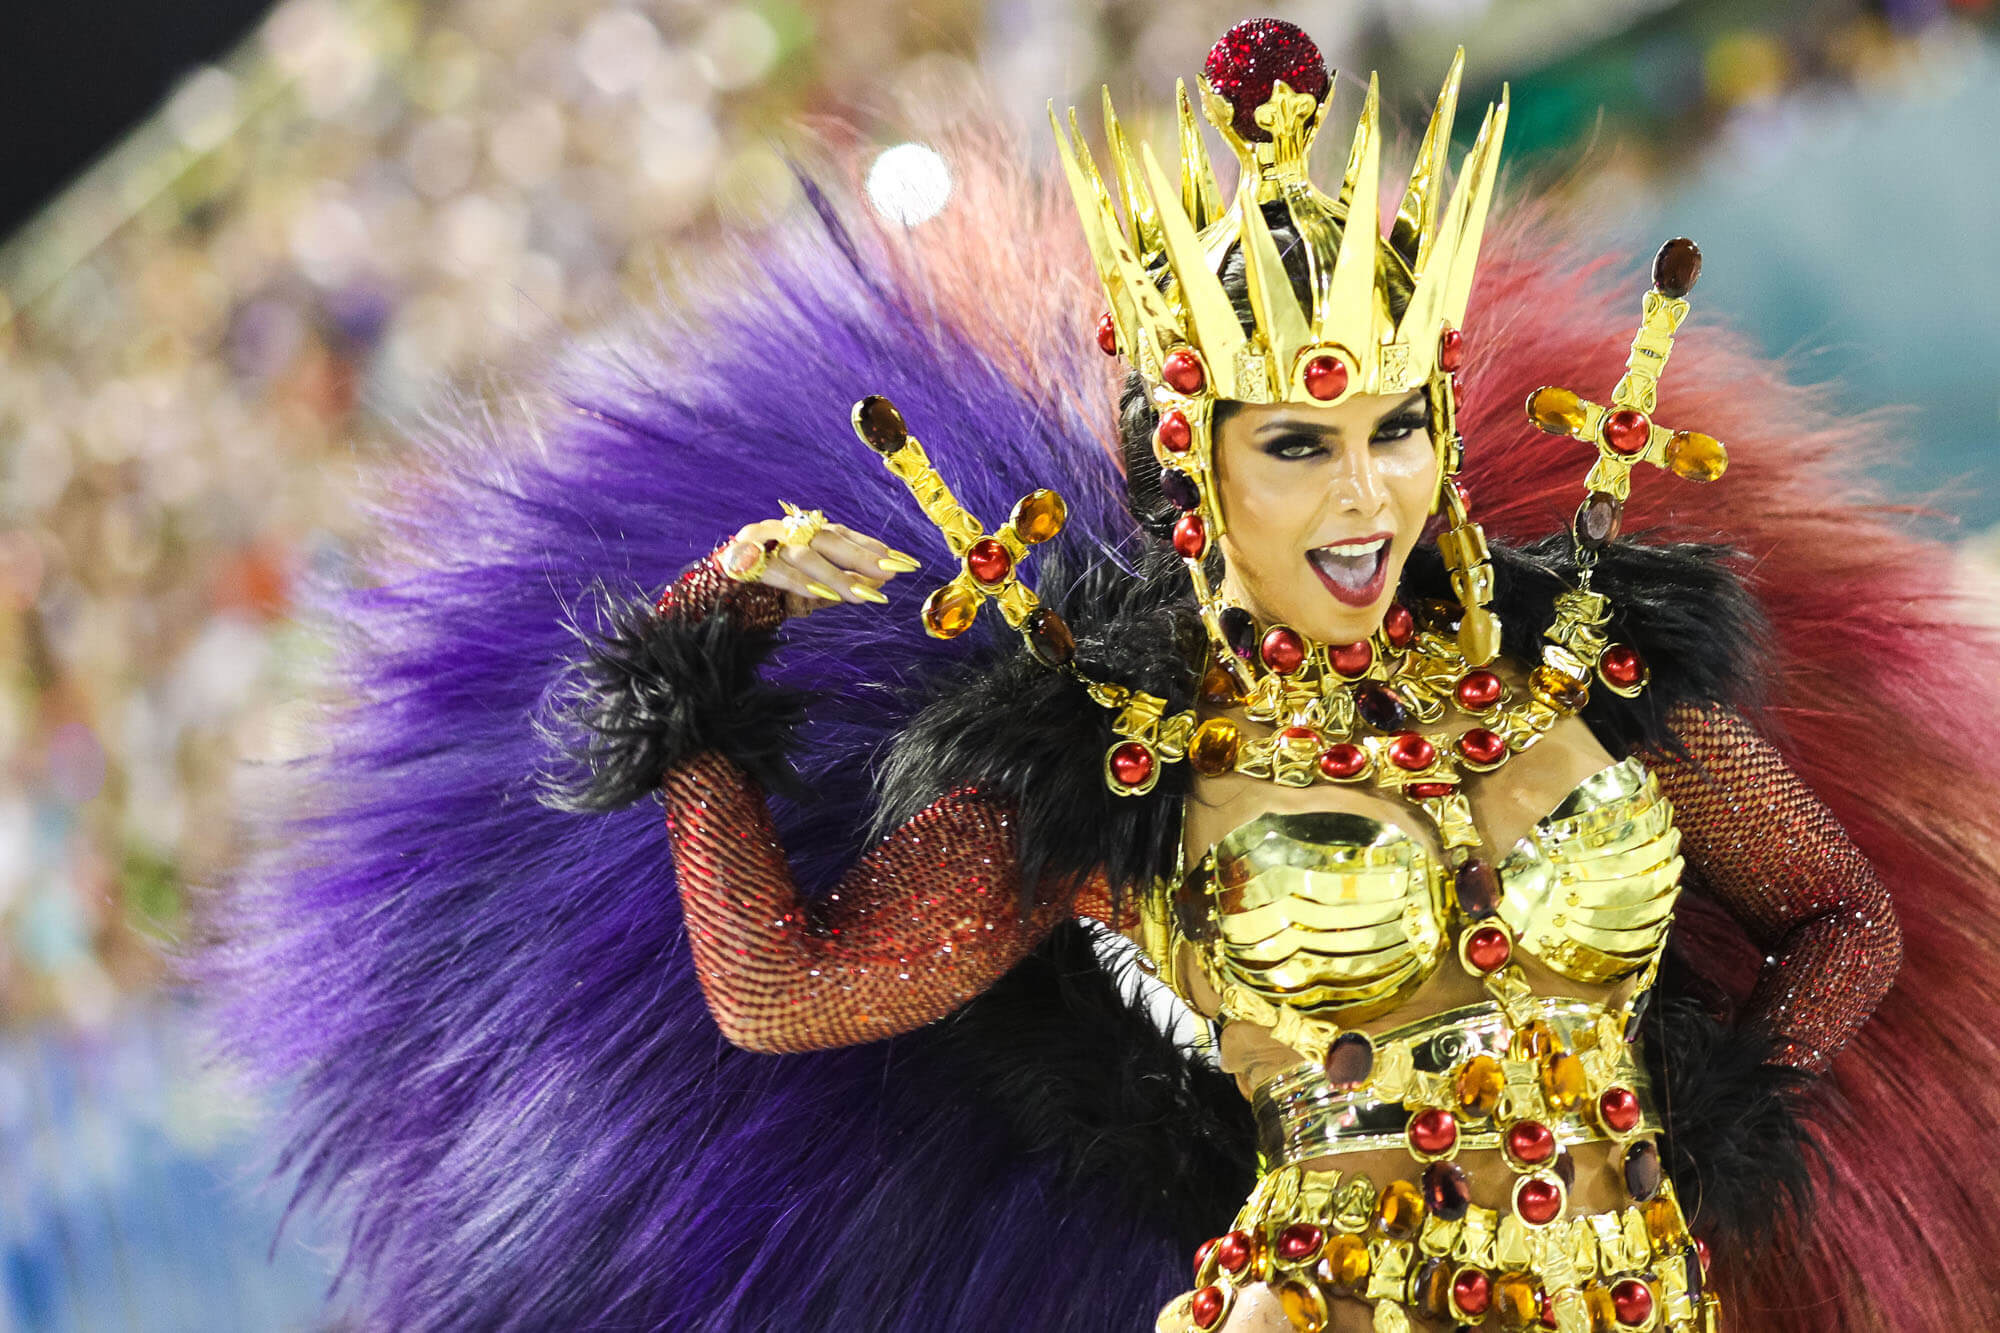 Rio Carnival Getty Images by Buda Mendes